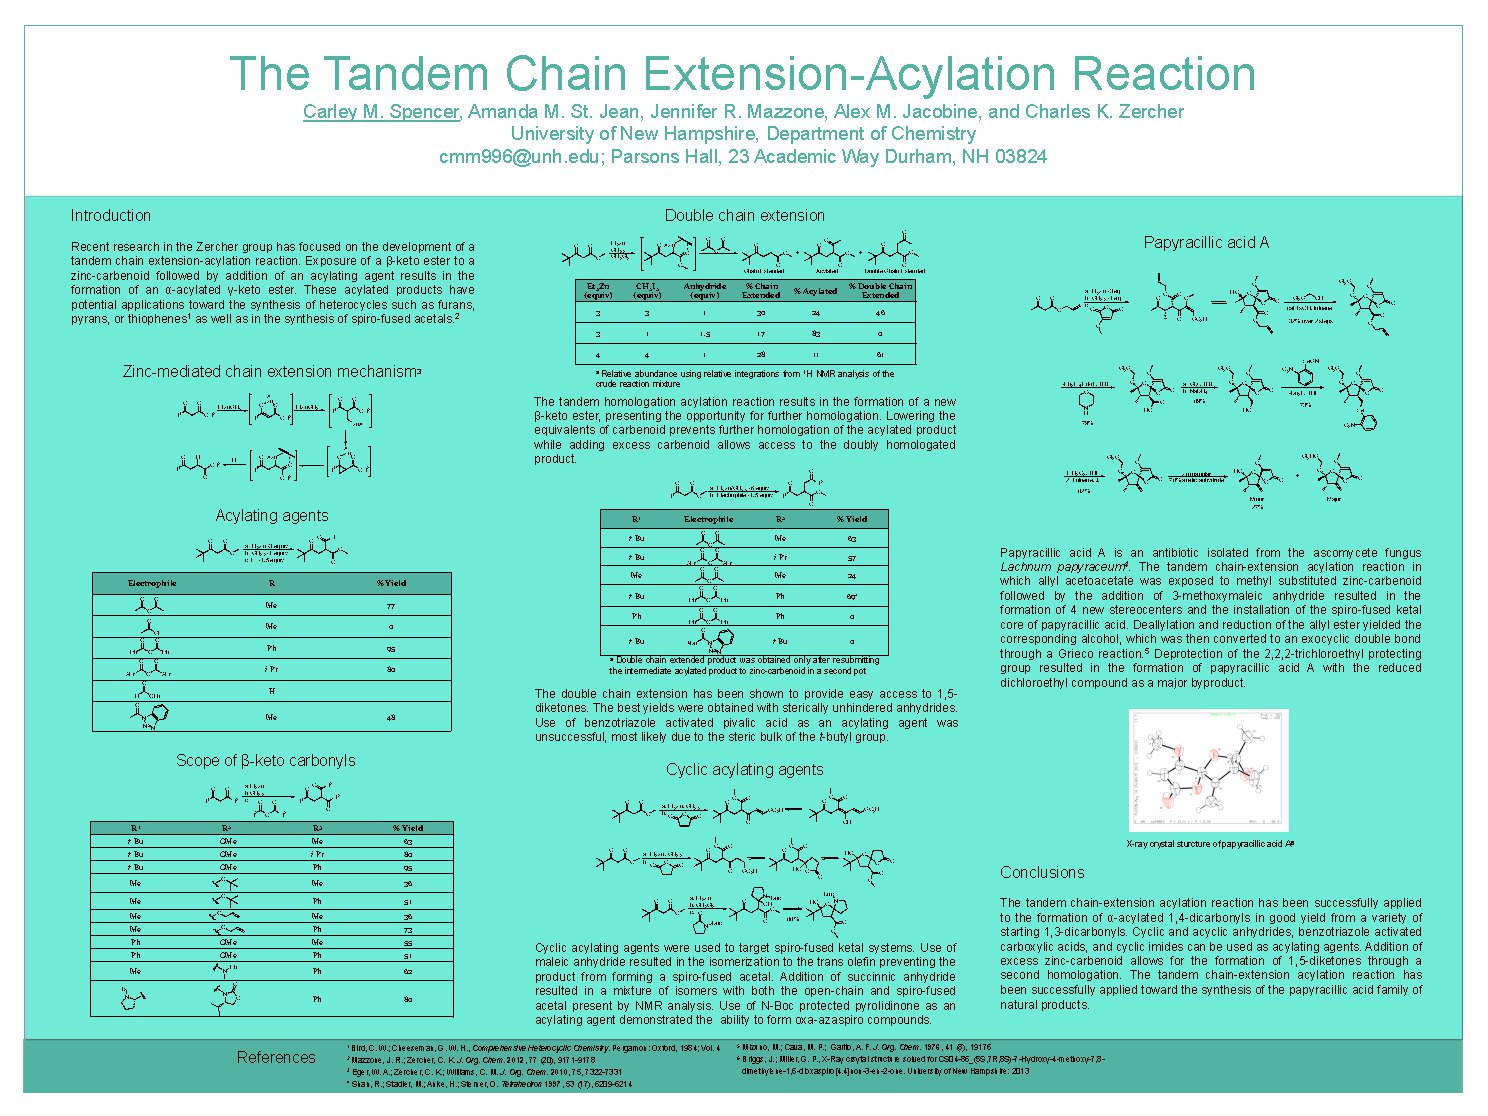 The Tandem Chain Extension Acylation Reaction by cmm996